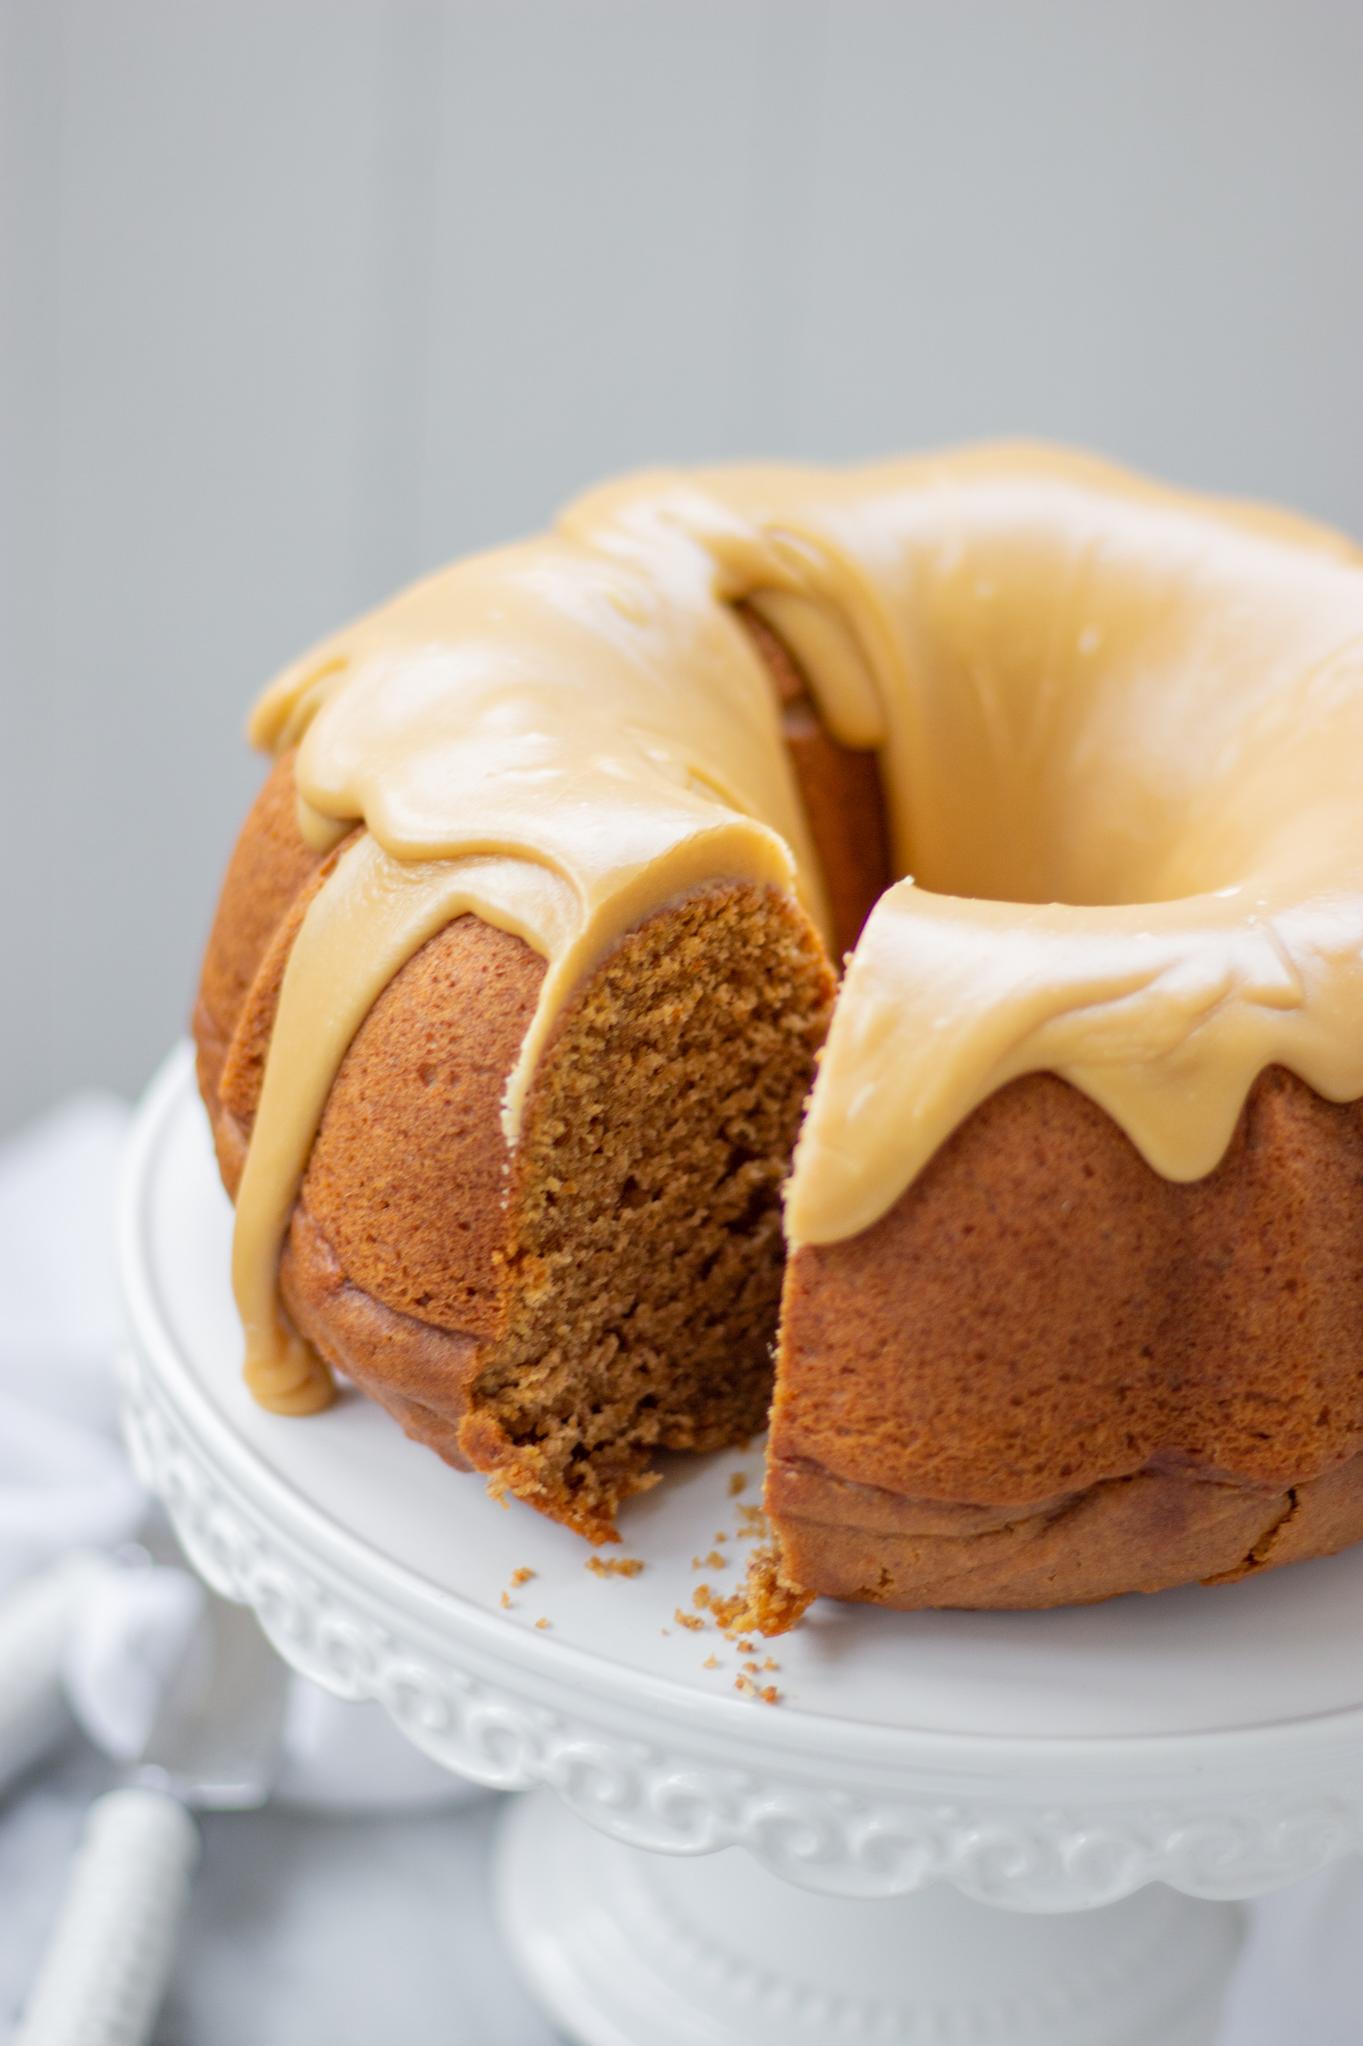  The perfect slice of sweet potato pound cake topped with warm caramel sauce.